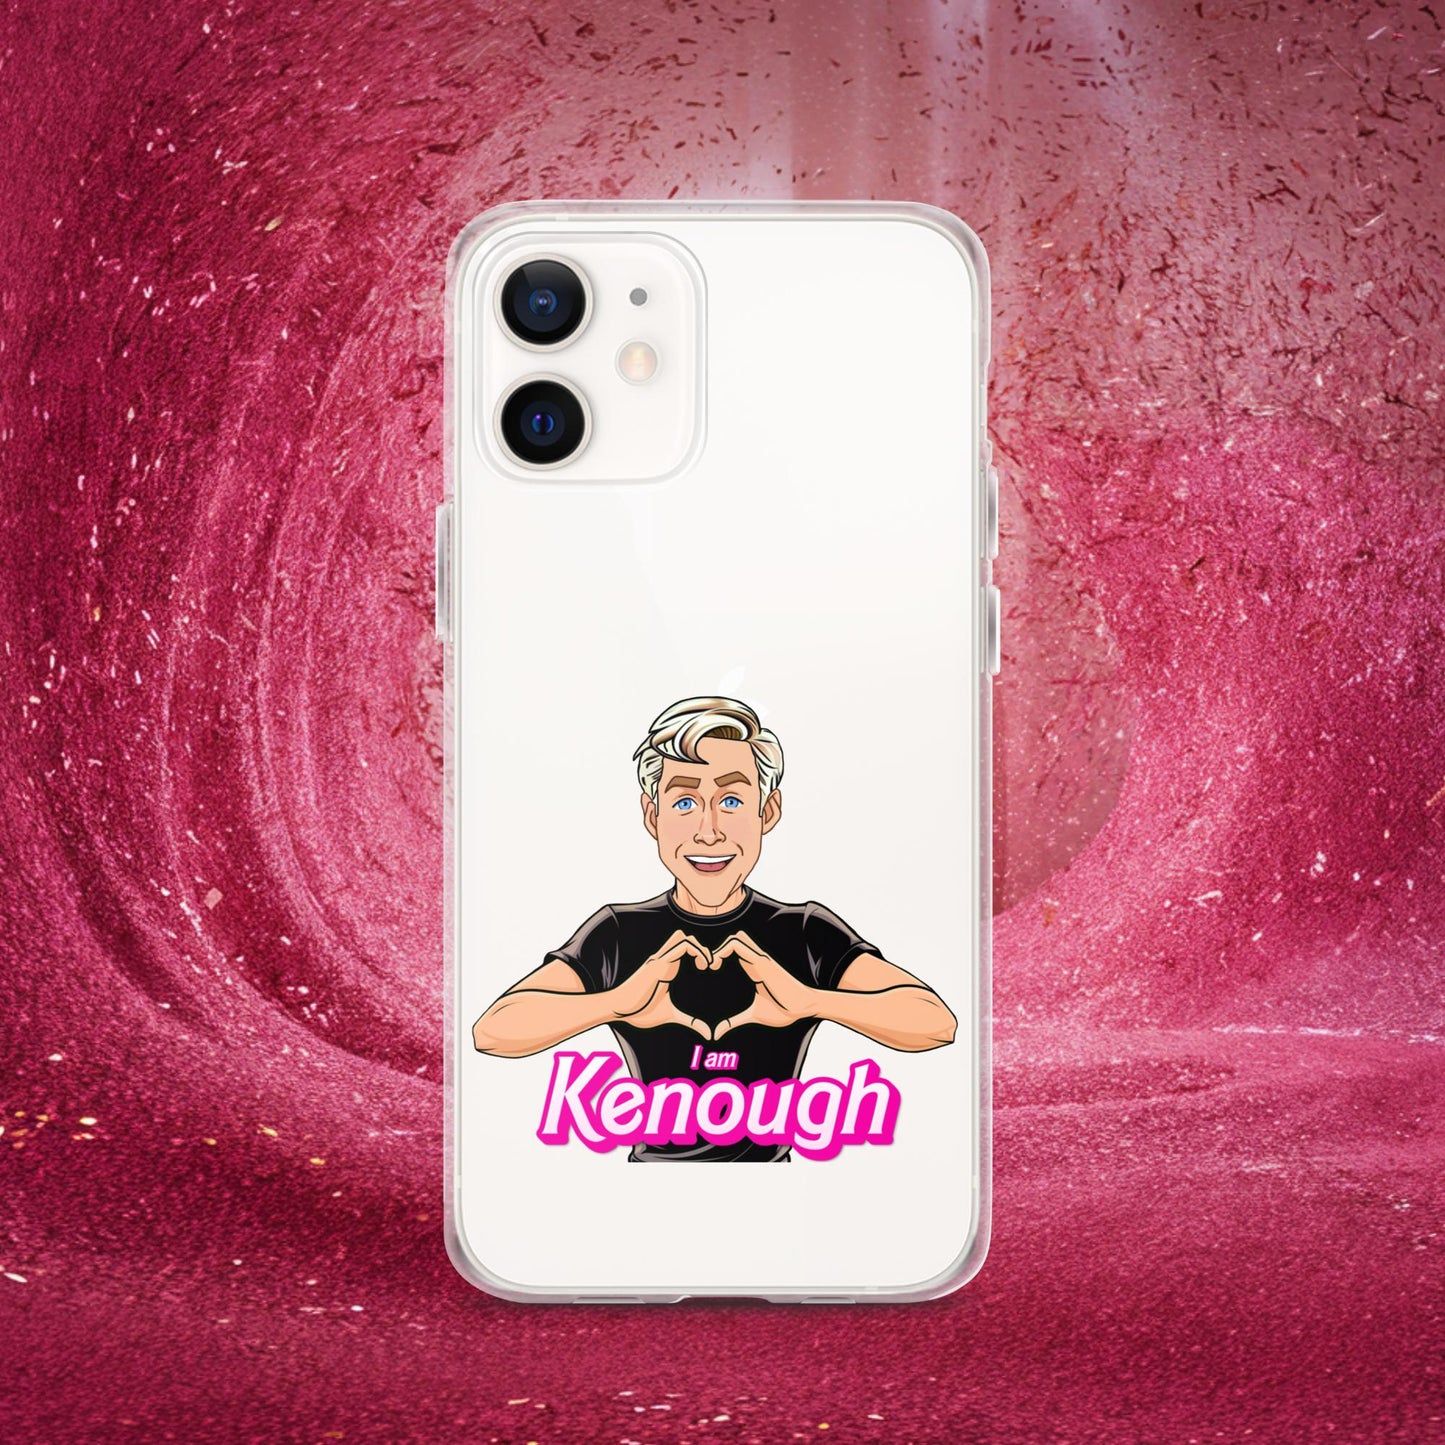 I am Kenough Ryan Gosling Ken Barbie Movie Clear Case for iPhone Next Cult Brand